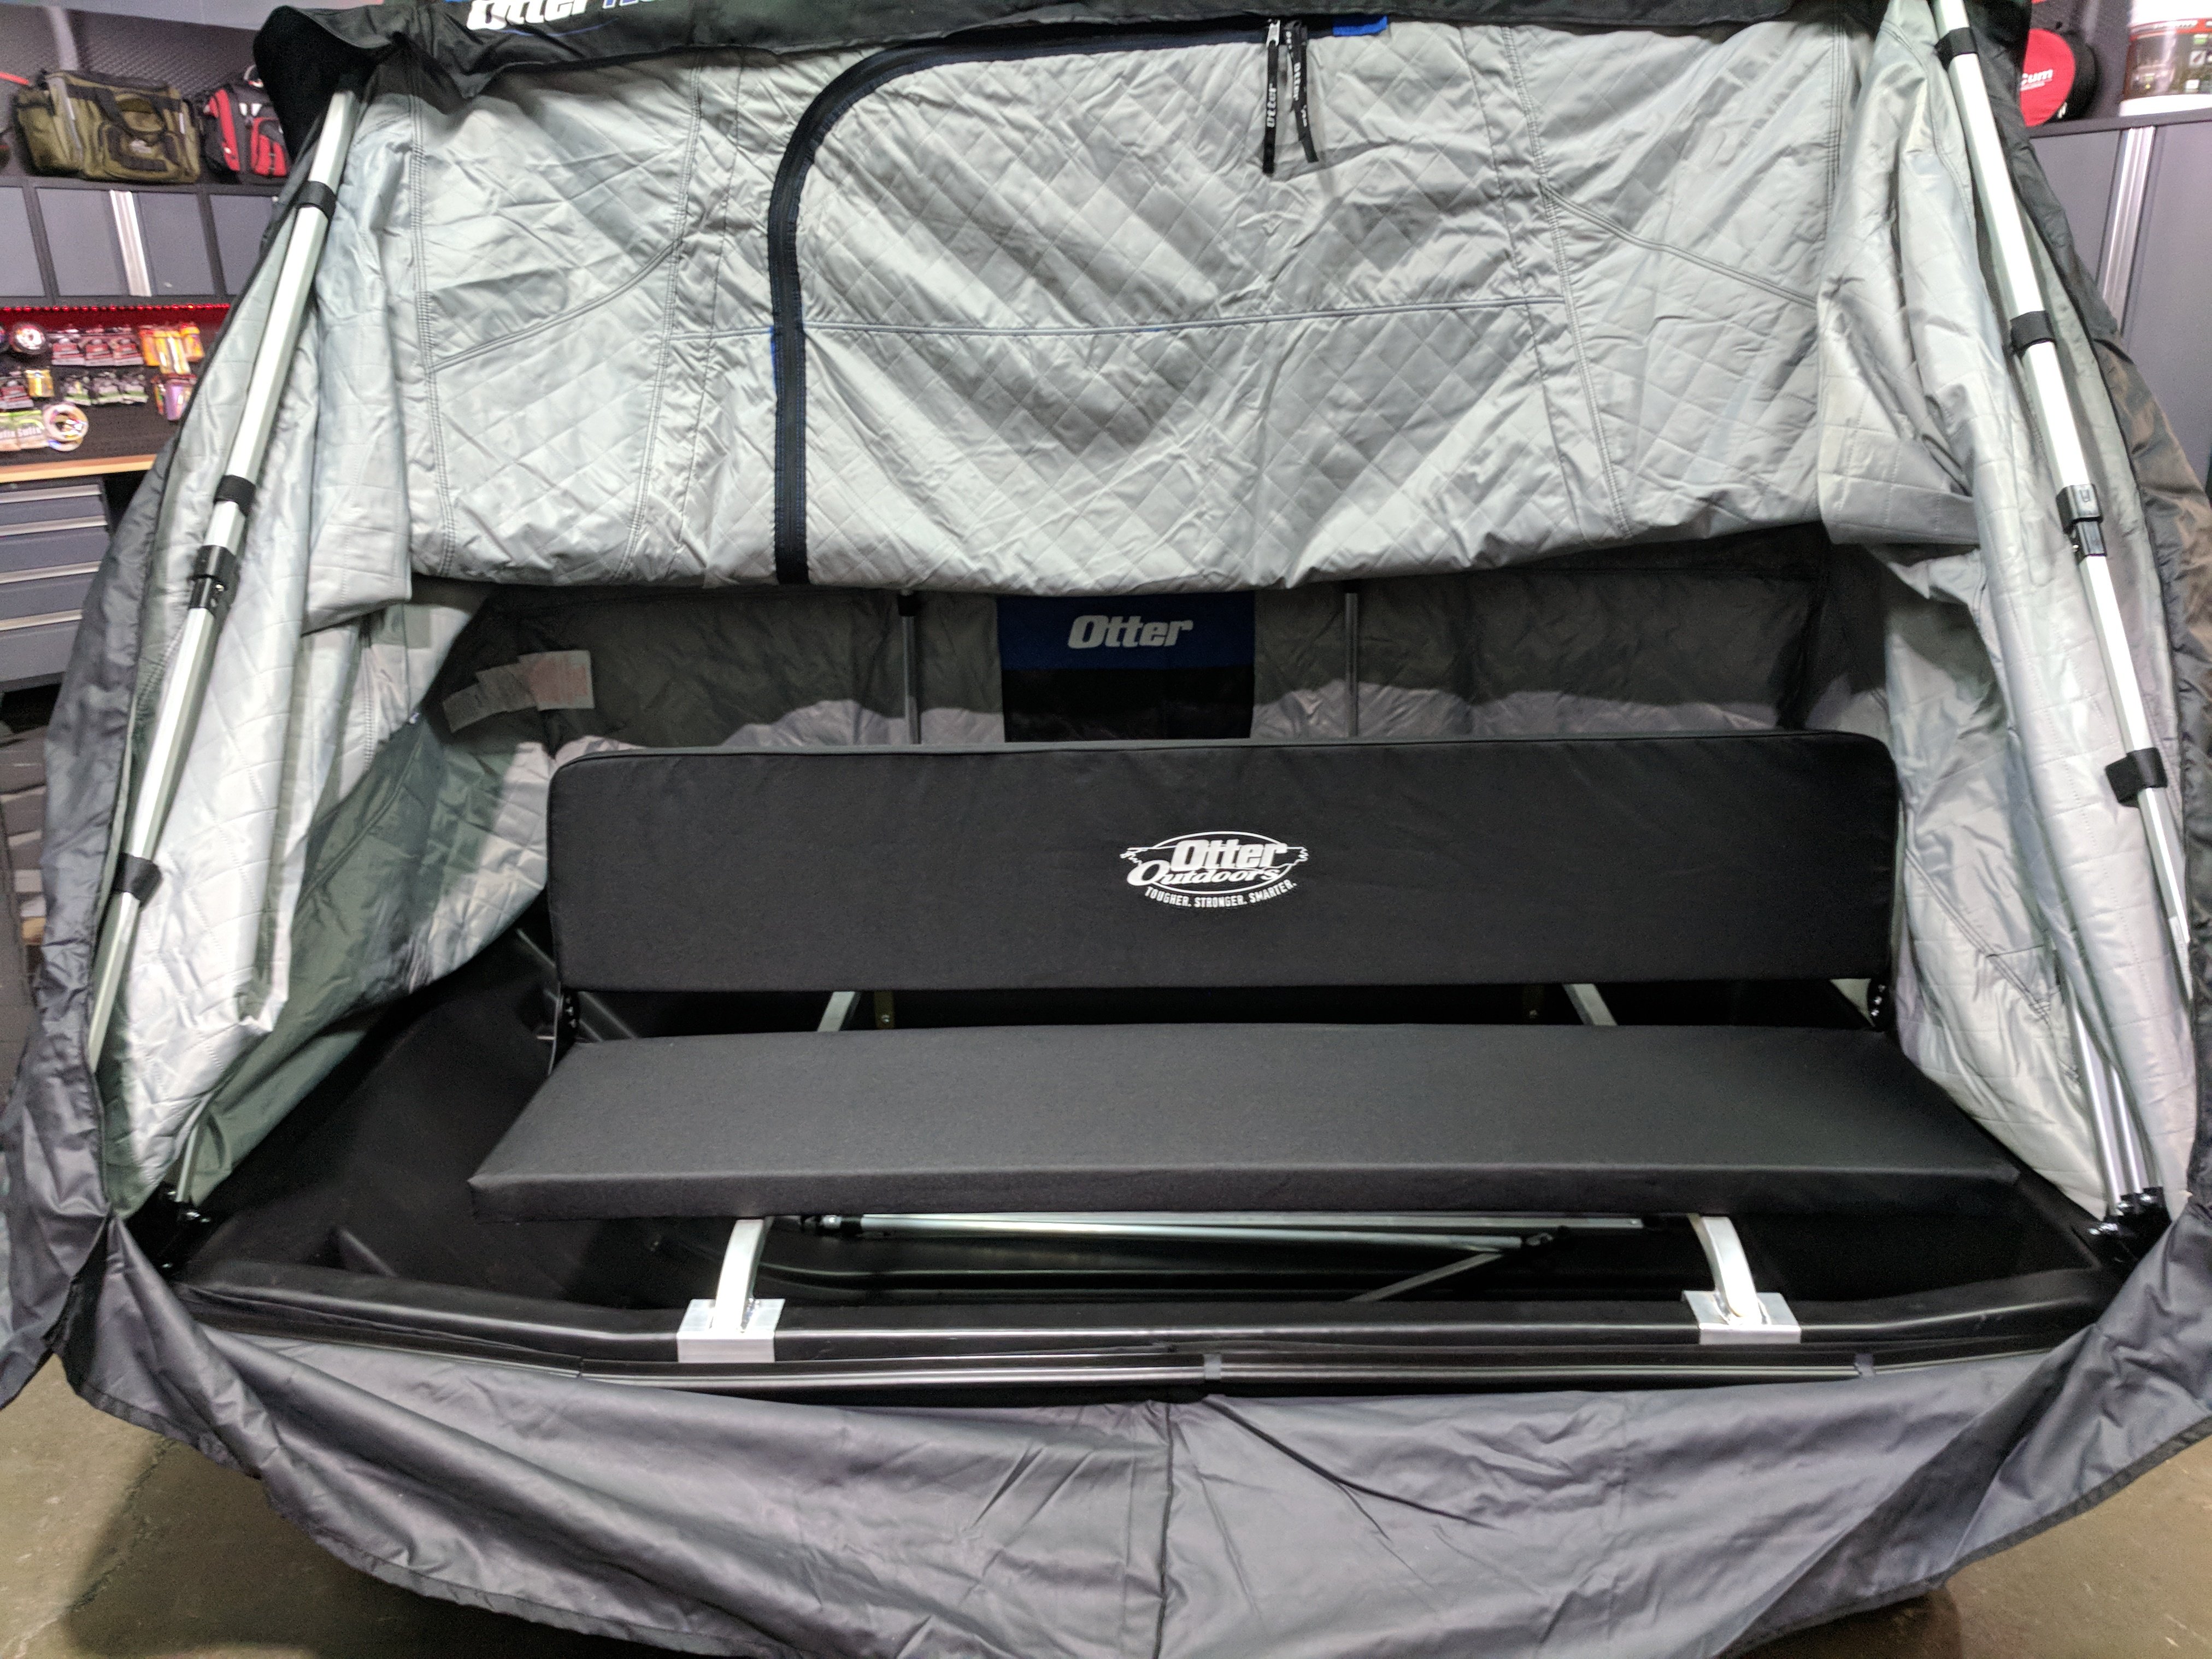 Otter Resort Bench Seating - Ice Fishing Forum | In-Depth Outdoors